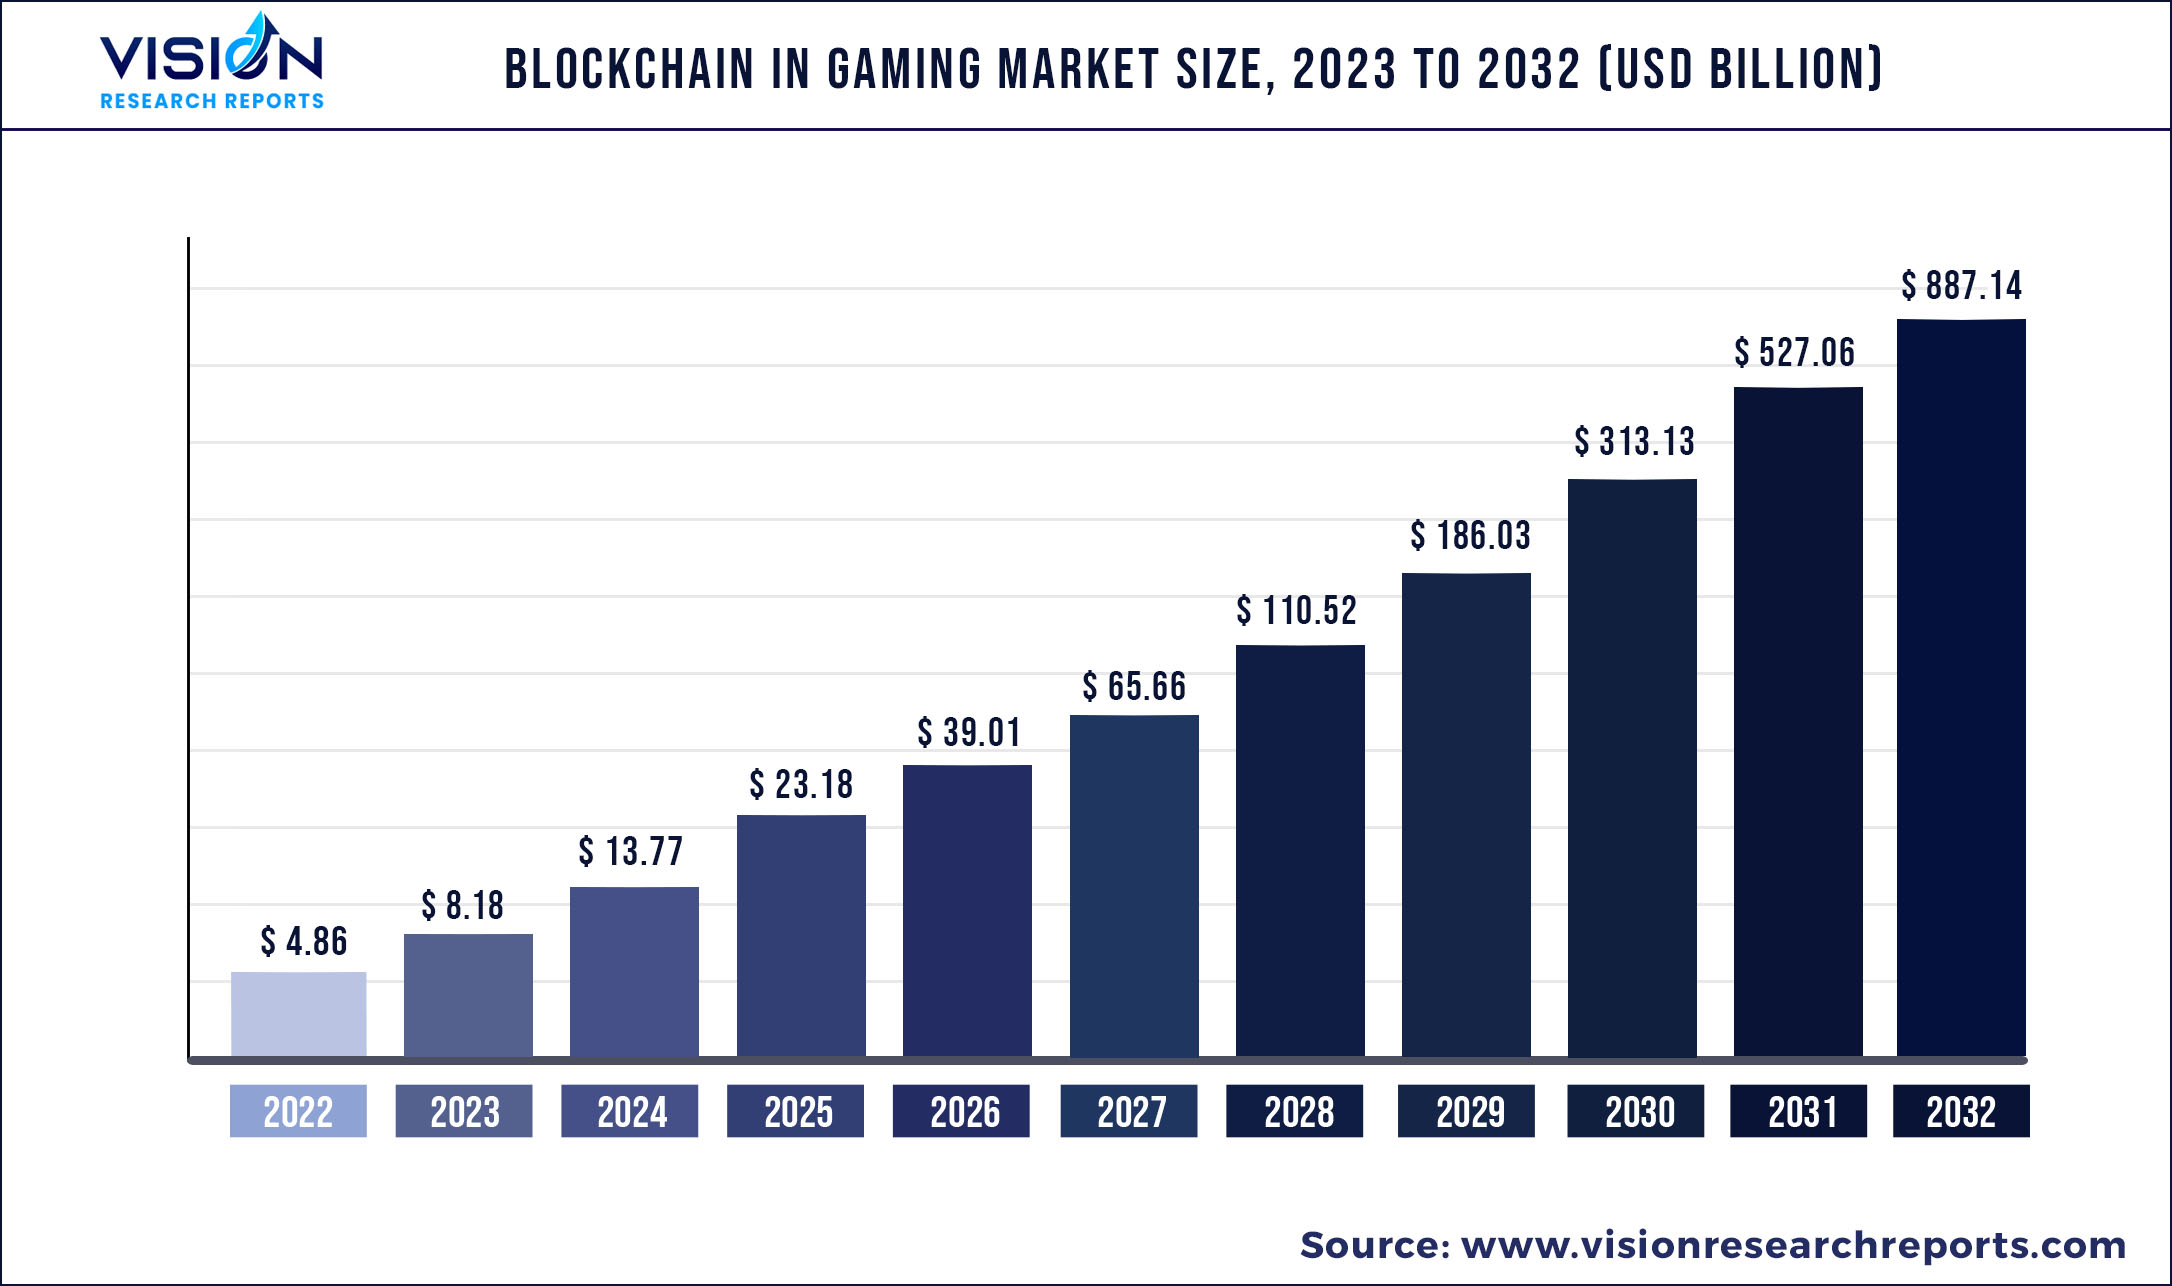 Blockchain In Gaming Market Size 2023 to 2032